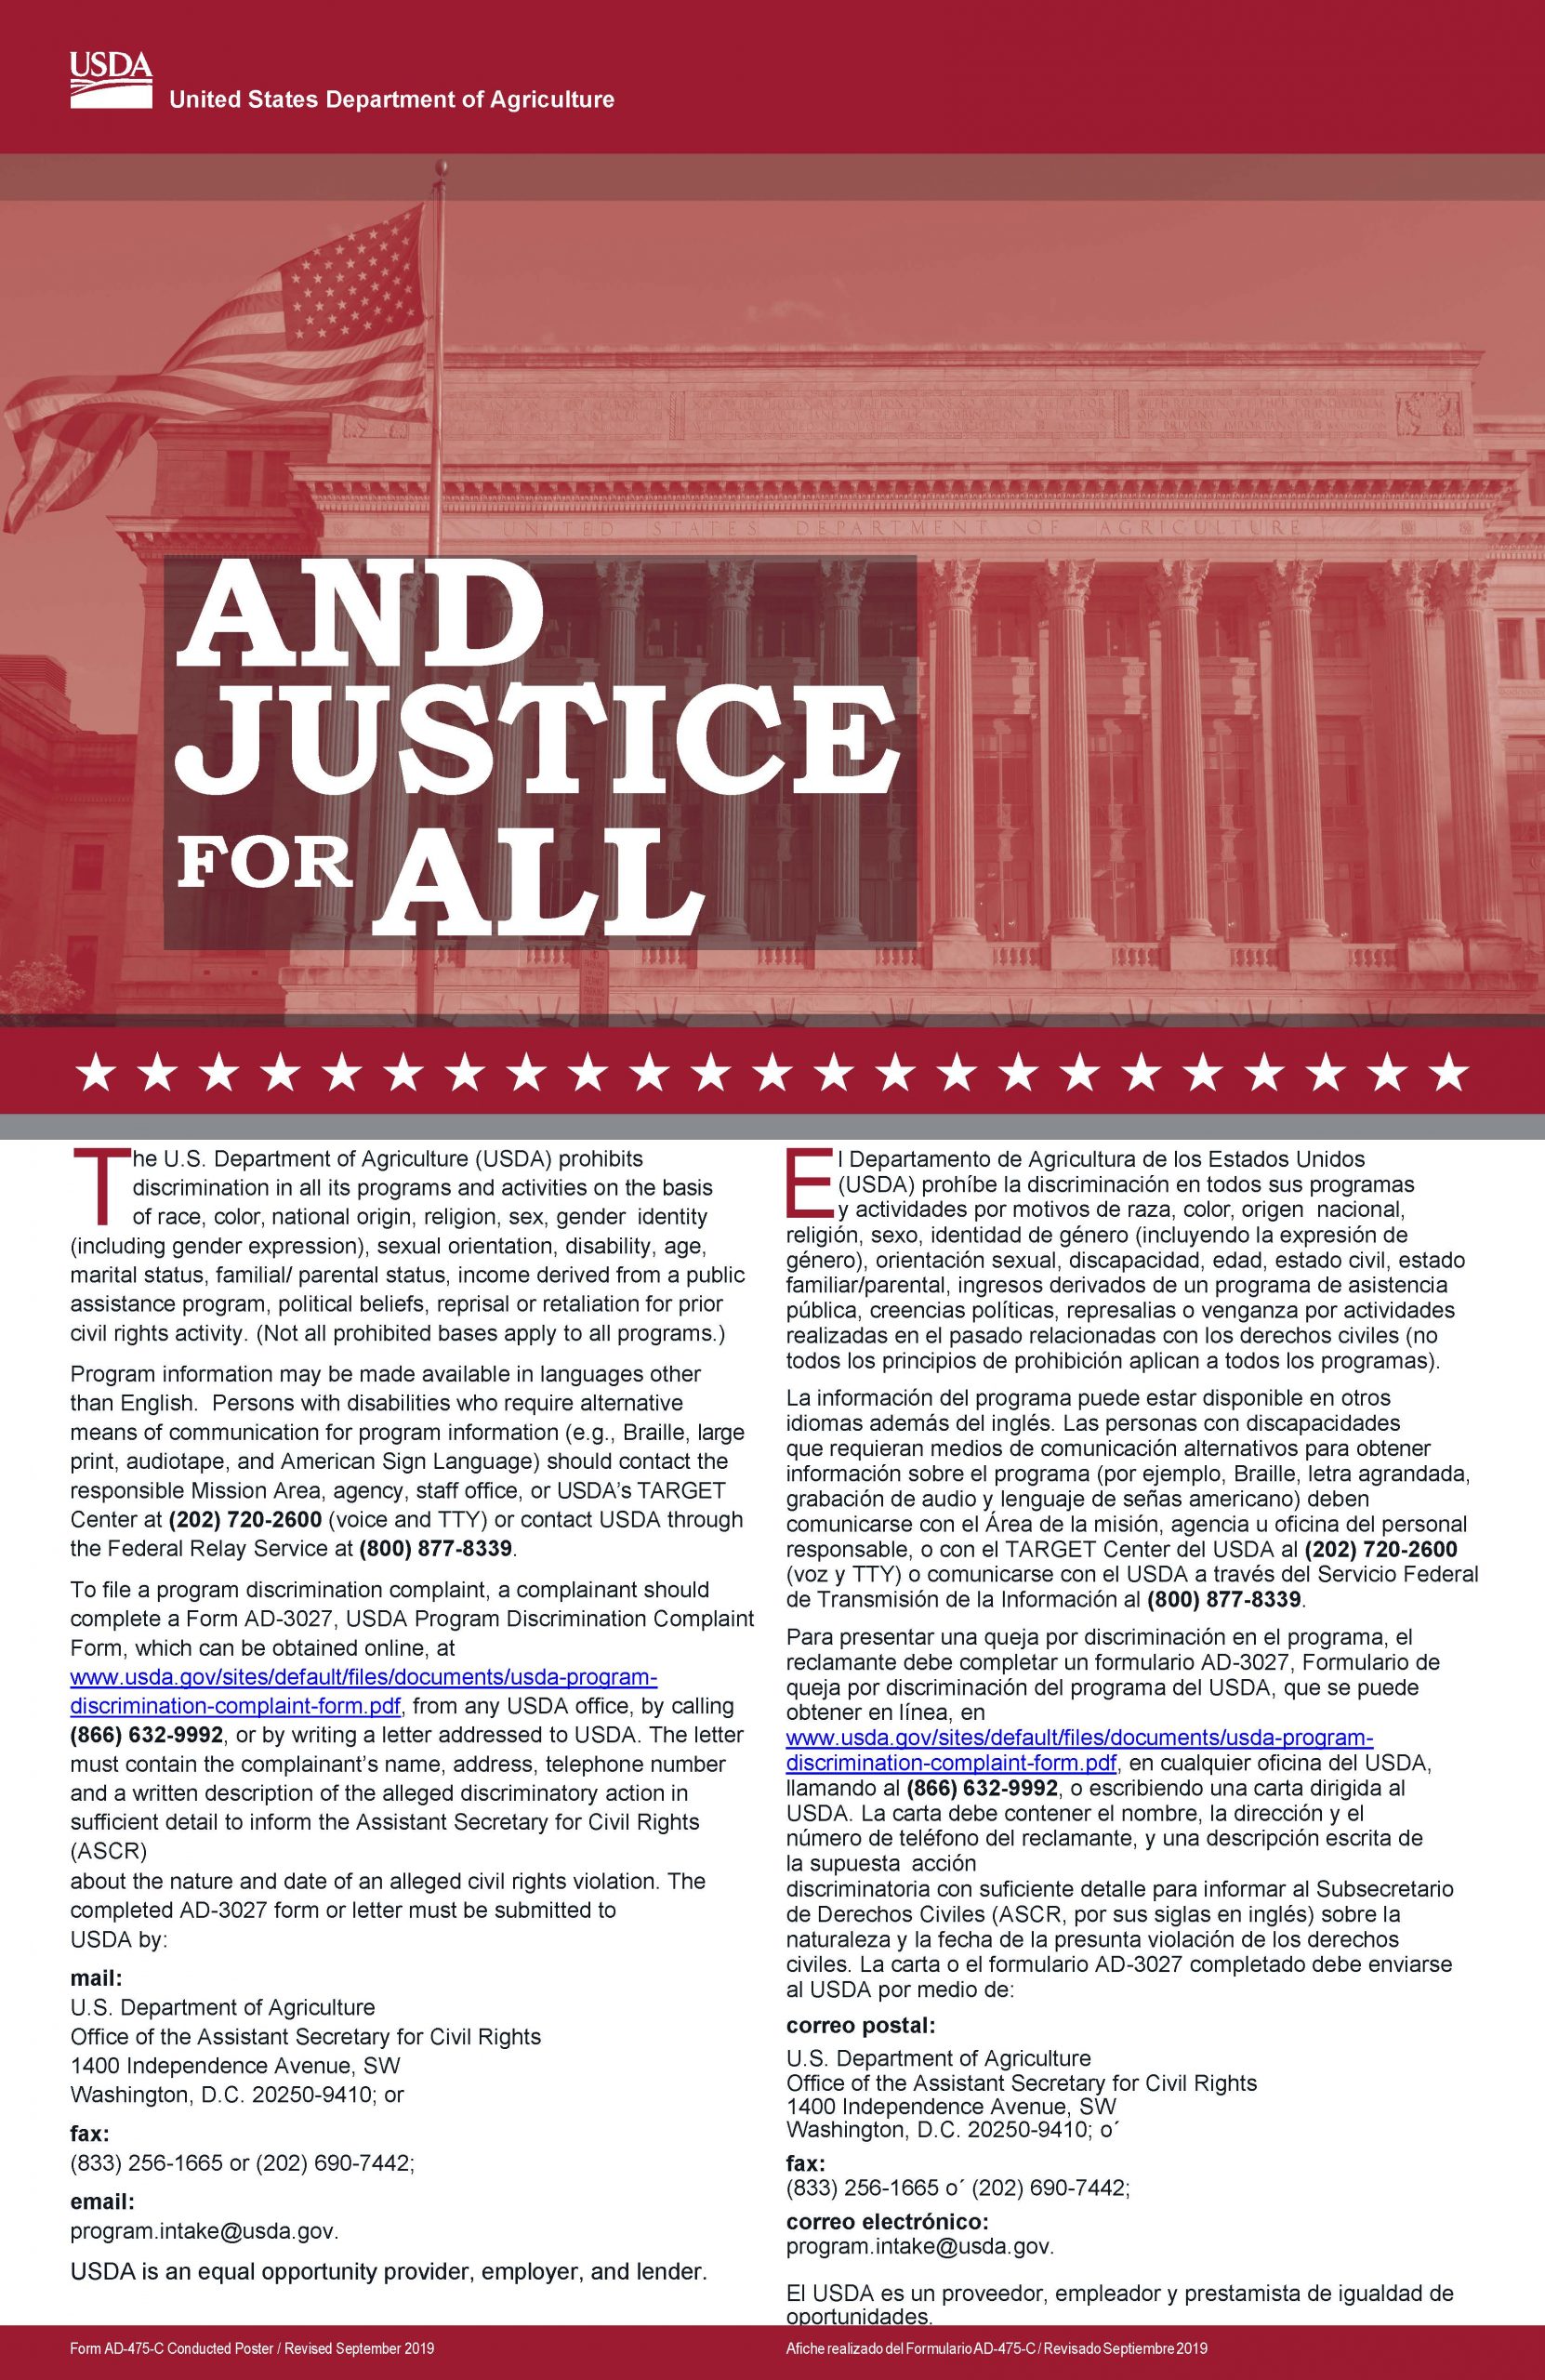 USDA justice for all red poster